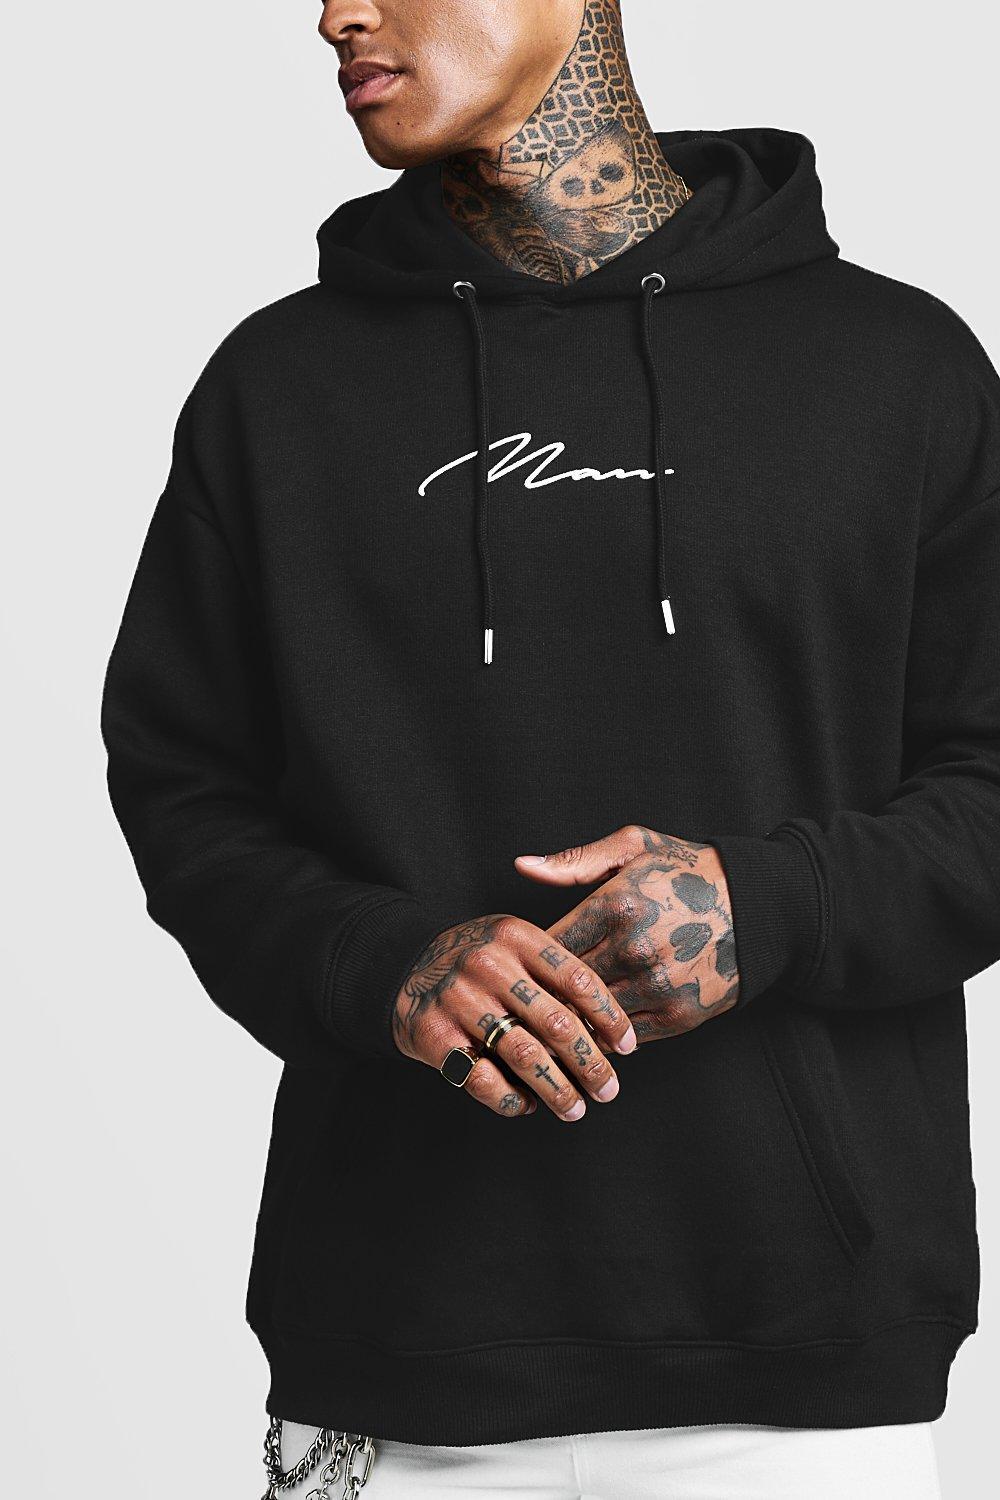 BoohooMAN Cotton Oversized Man Signature Hoodie in Black for Men - Lyst